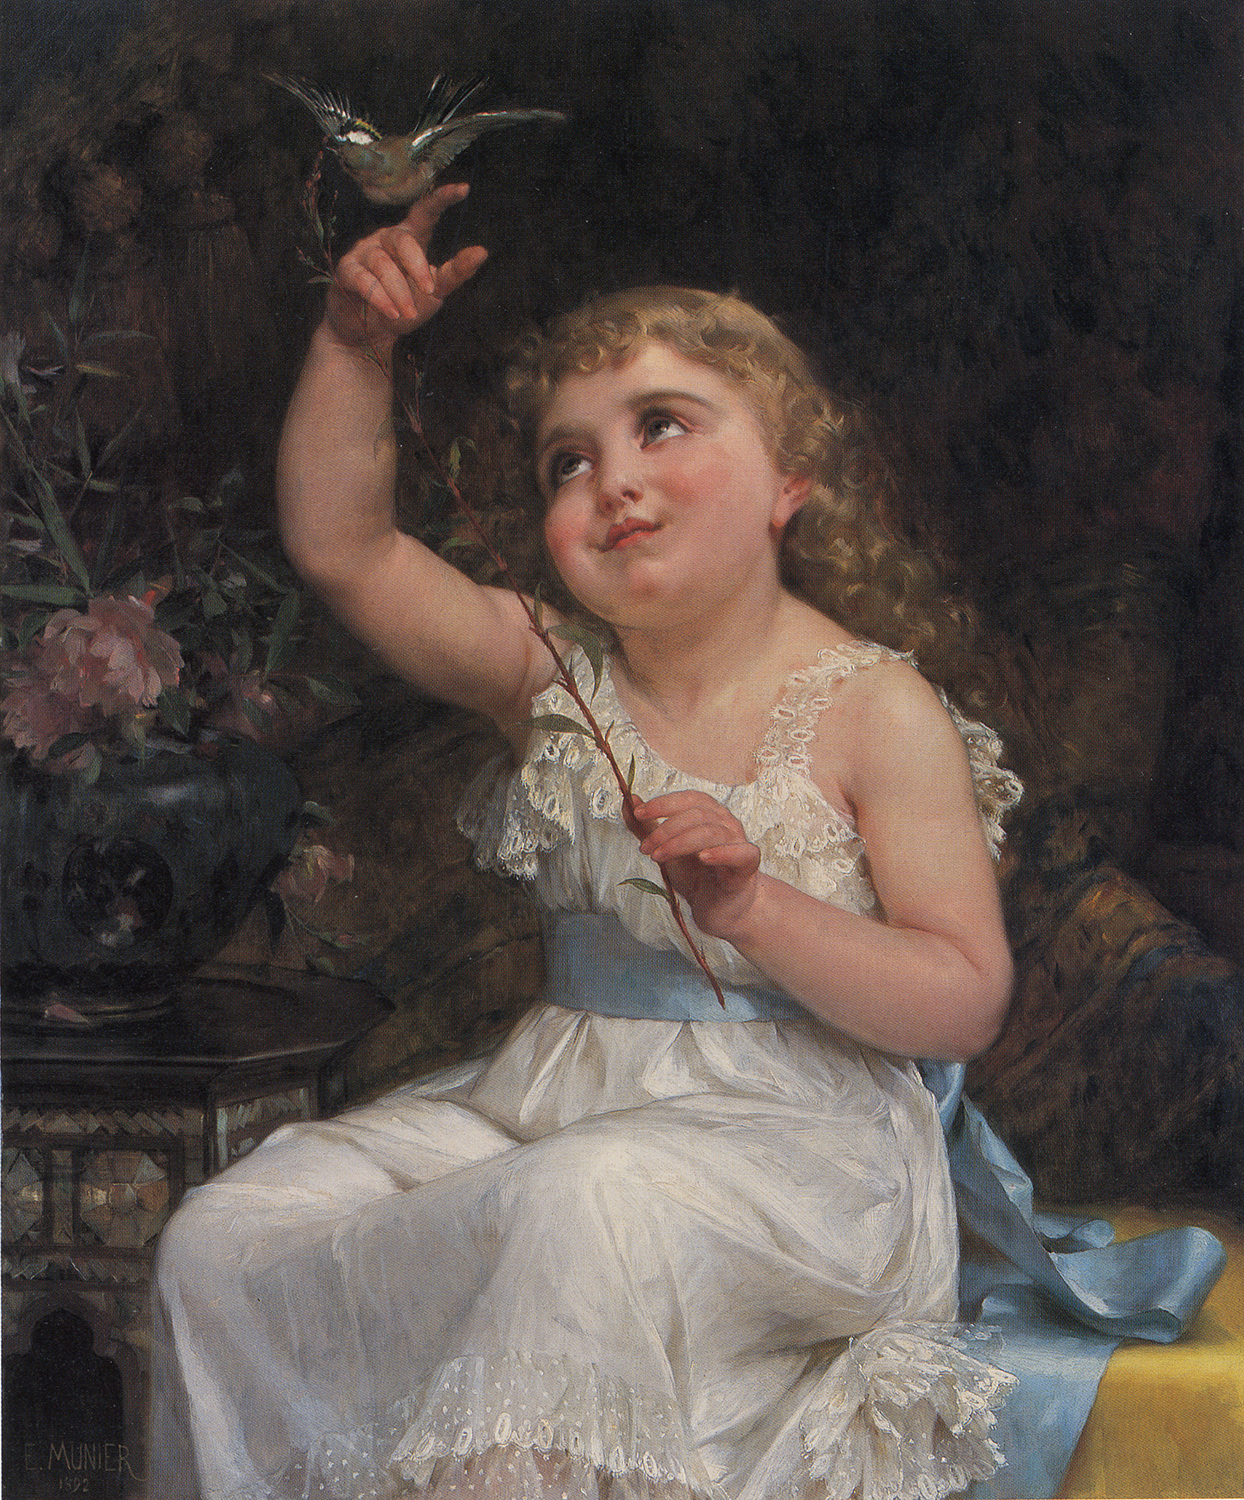 a young girl seated on a bench with a bird on her finger - Her New Friend - Emile Munier